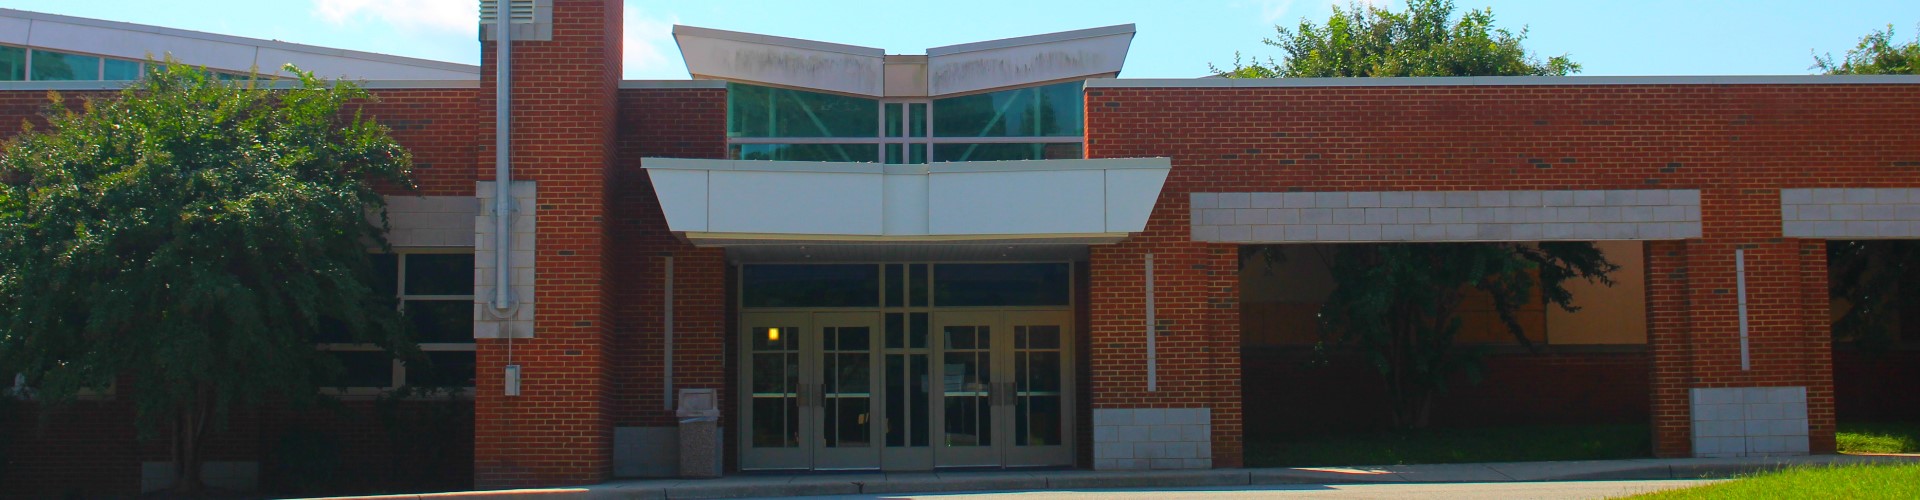 Hamilton Holmes Middle School front of building 